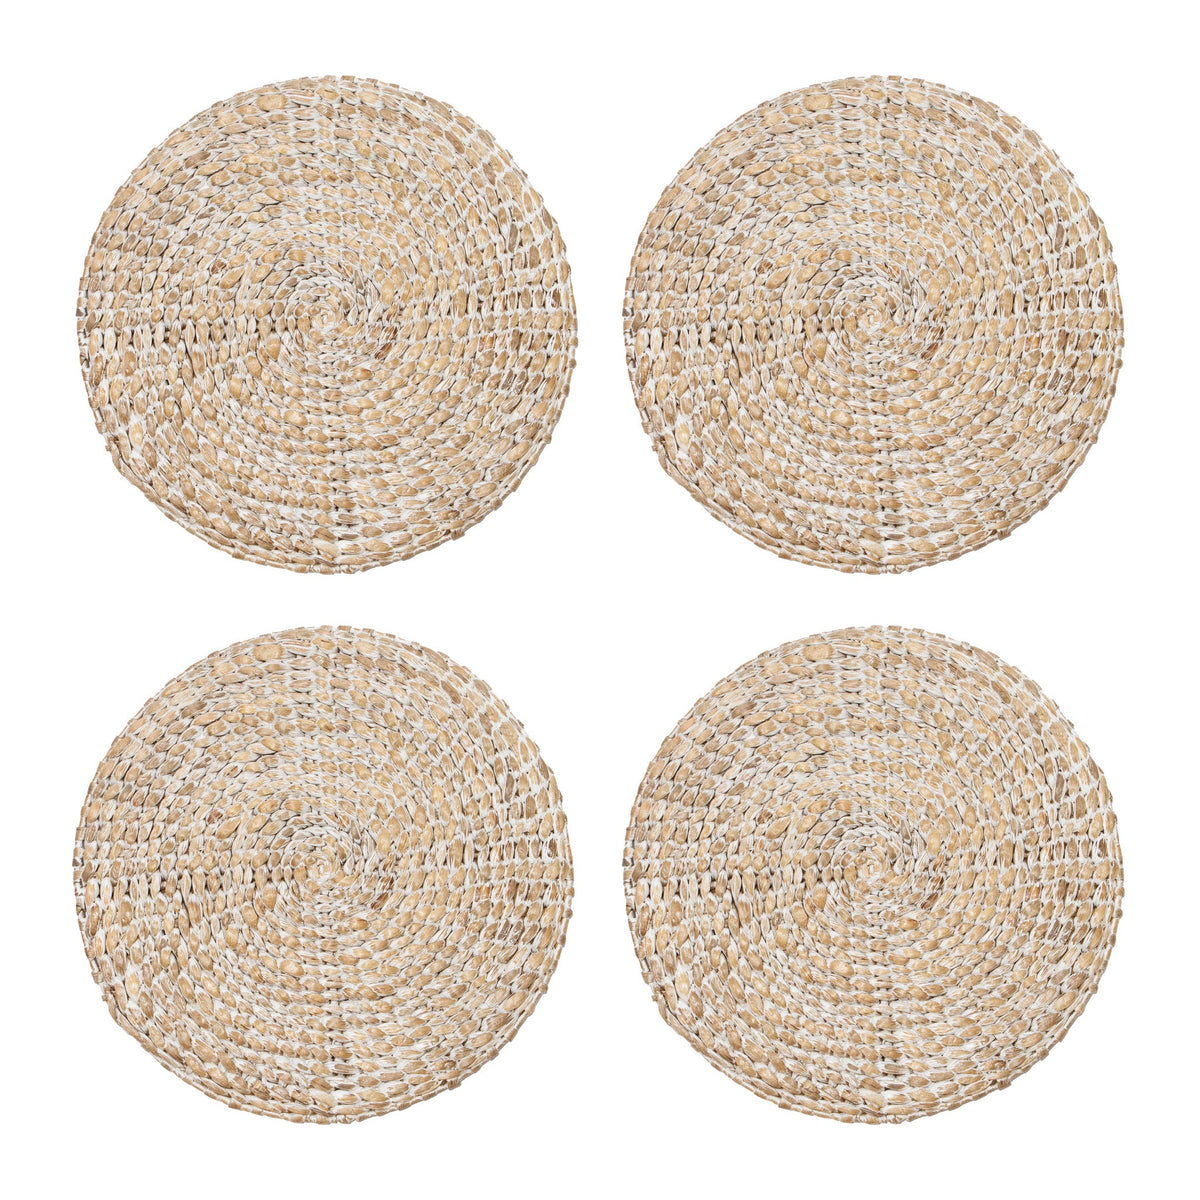 Everyday White Wash Round Placemat, Set of 4